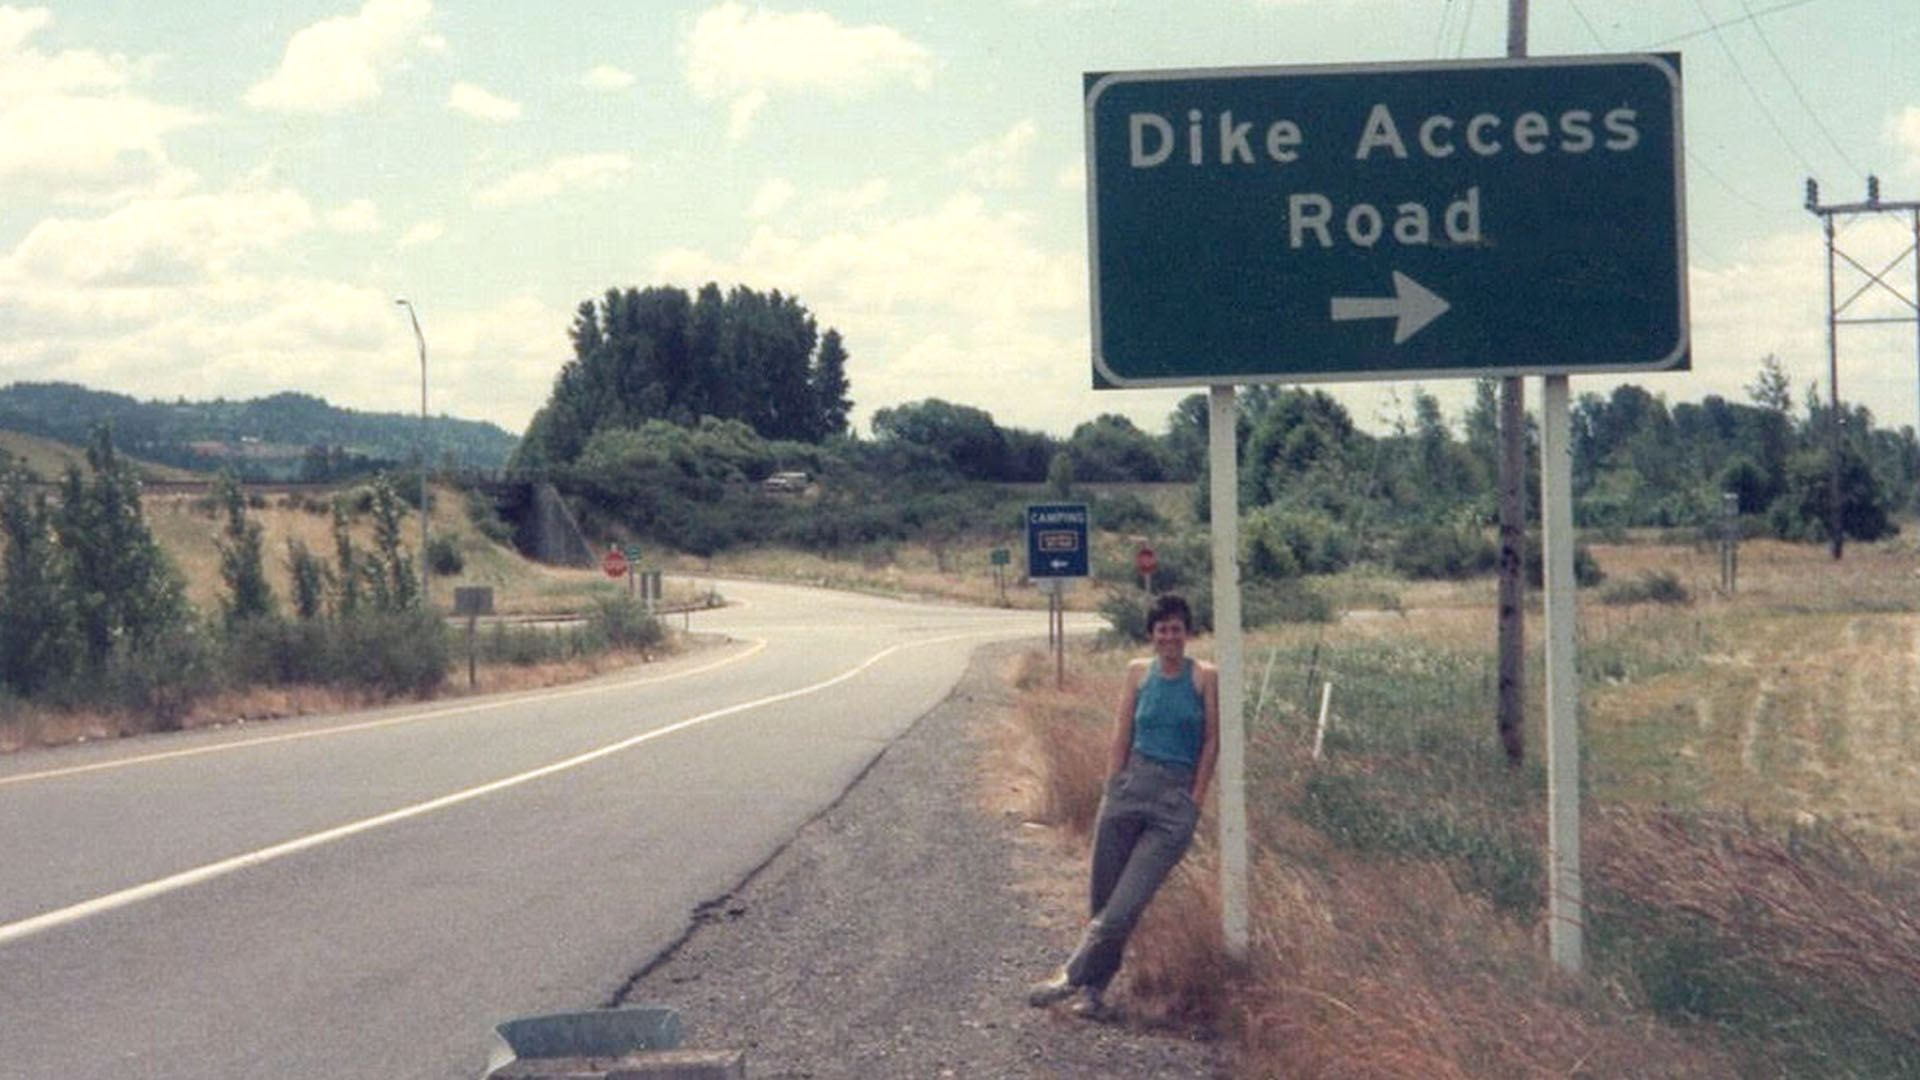 Judith Raiskin standing leans against Dike Access Road highway guide sign in Oregon.